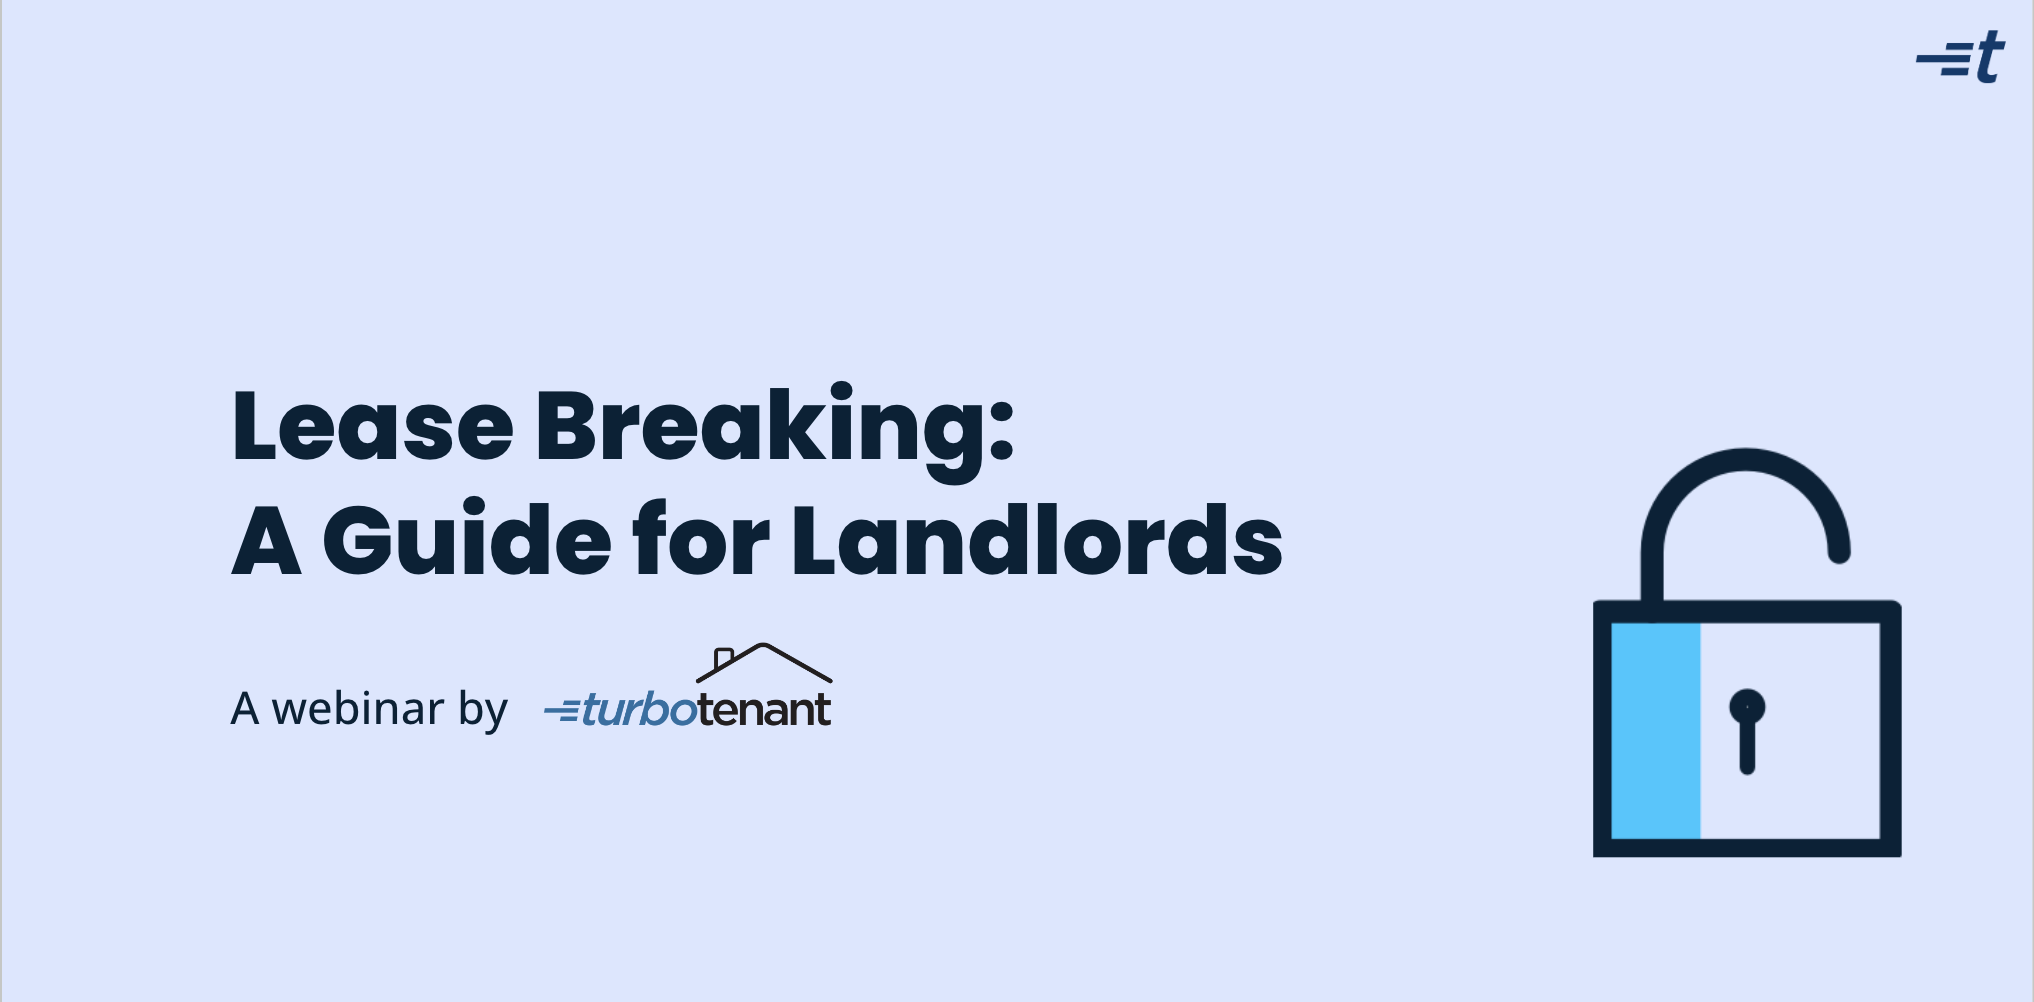 Lease Breaking: A Guide for Landlords